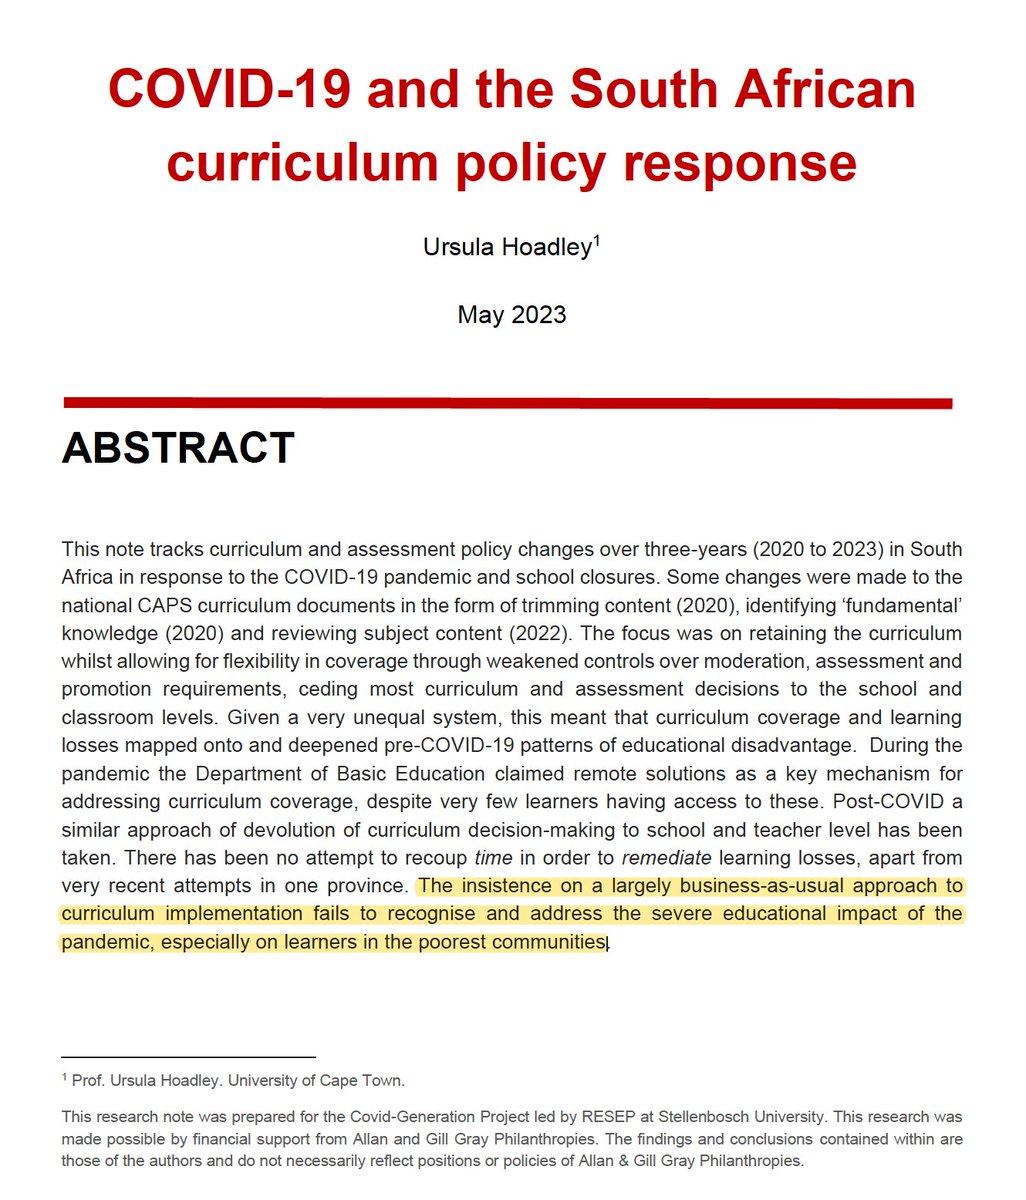 We look forward to the #PIRLS2021 results release today, even though they are likely to show dramatic declines in reading. 

Yesterday we launched a report 'COVID-19 and the South African curriculum policy response' by Prof Ursula Hoadley. PDF avail here  resep.sun.ac.za/wp-content/upl…